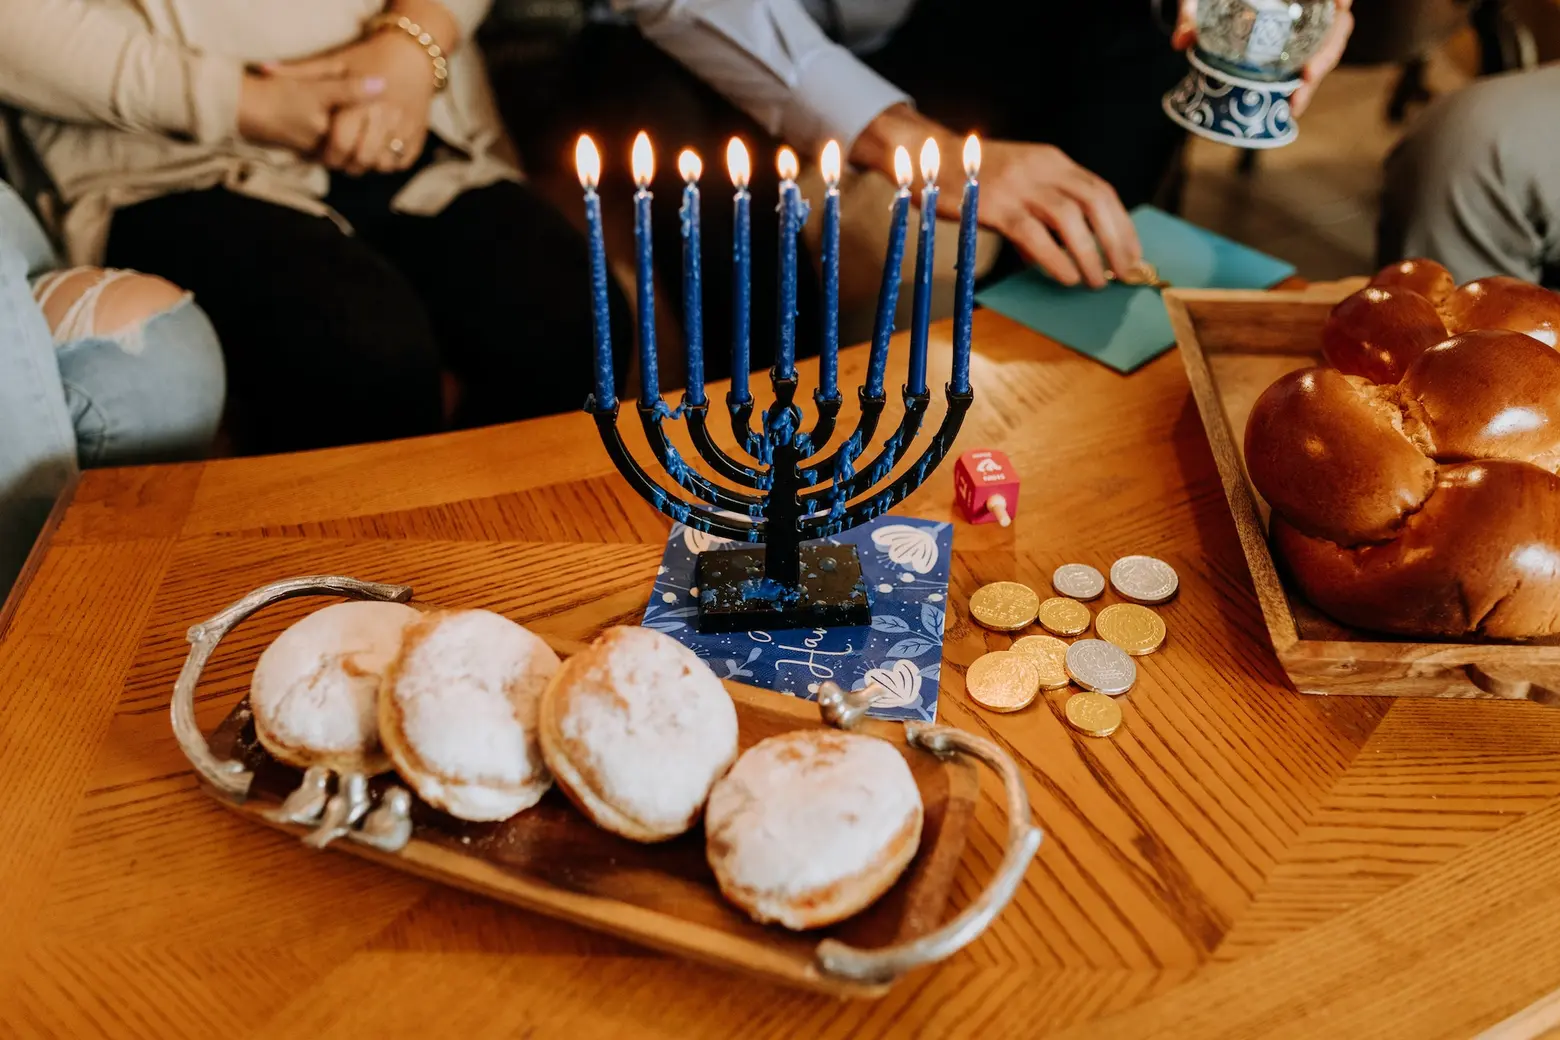 Where to get takeout latkes and treats for Hanukkah in NYC